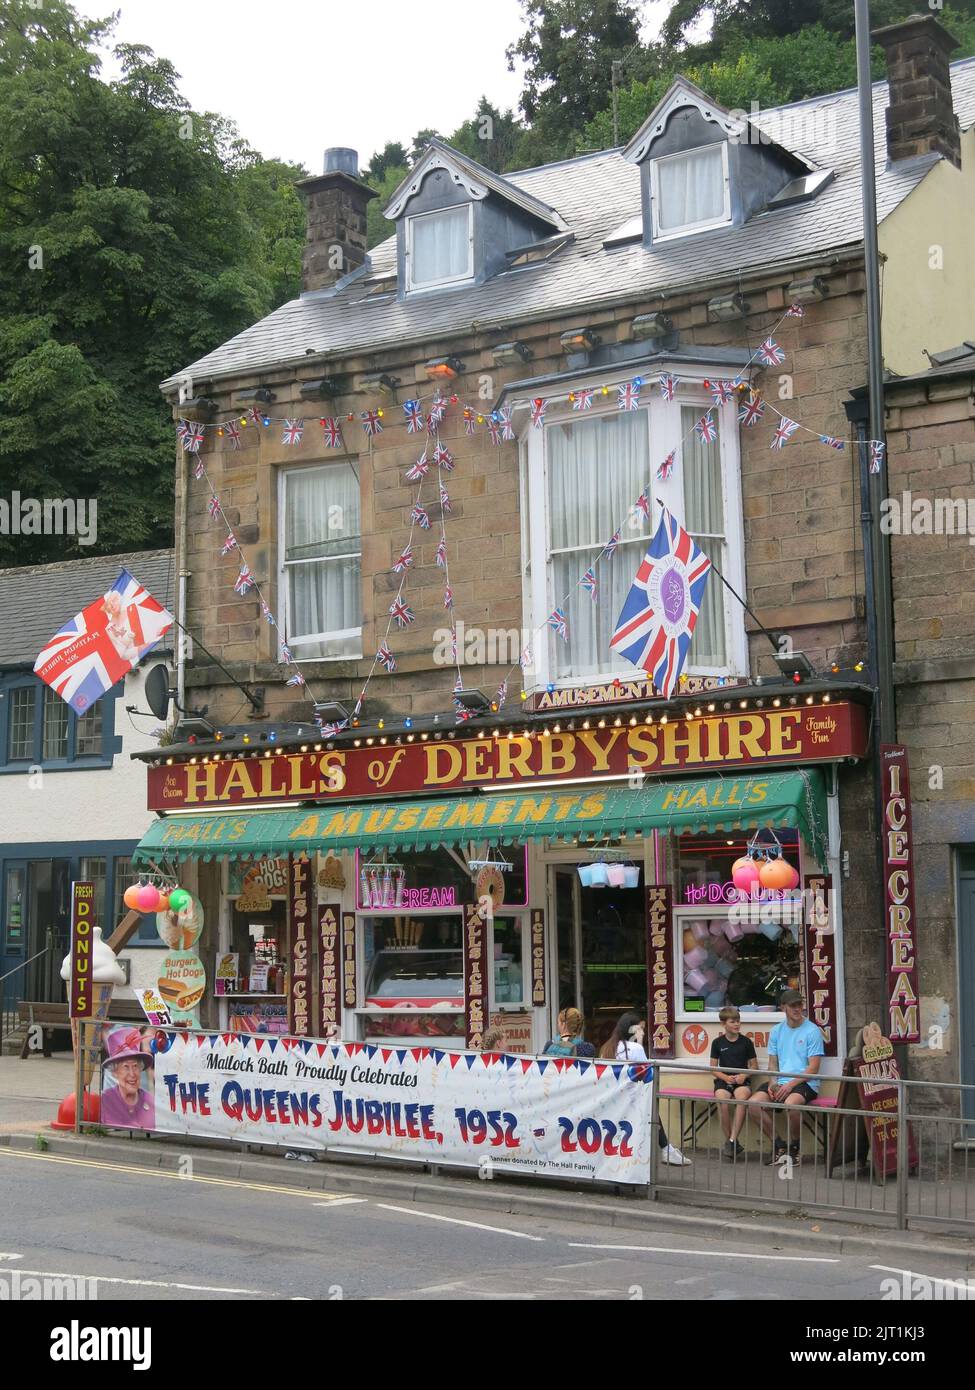 Hall's of Derbyshire is a popular restaurant & ice cream parlour in the spa town of Matlock Bath; decorated in flags & bunting for the Queen's Jubilee. Stock Photo